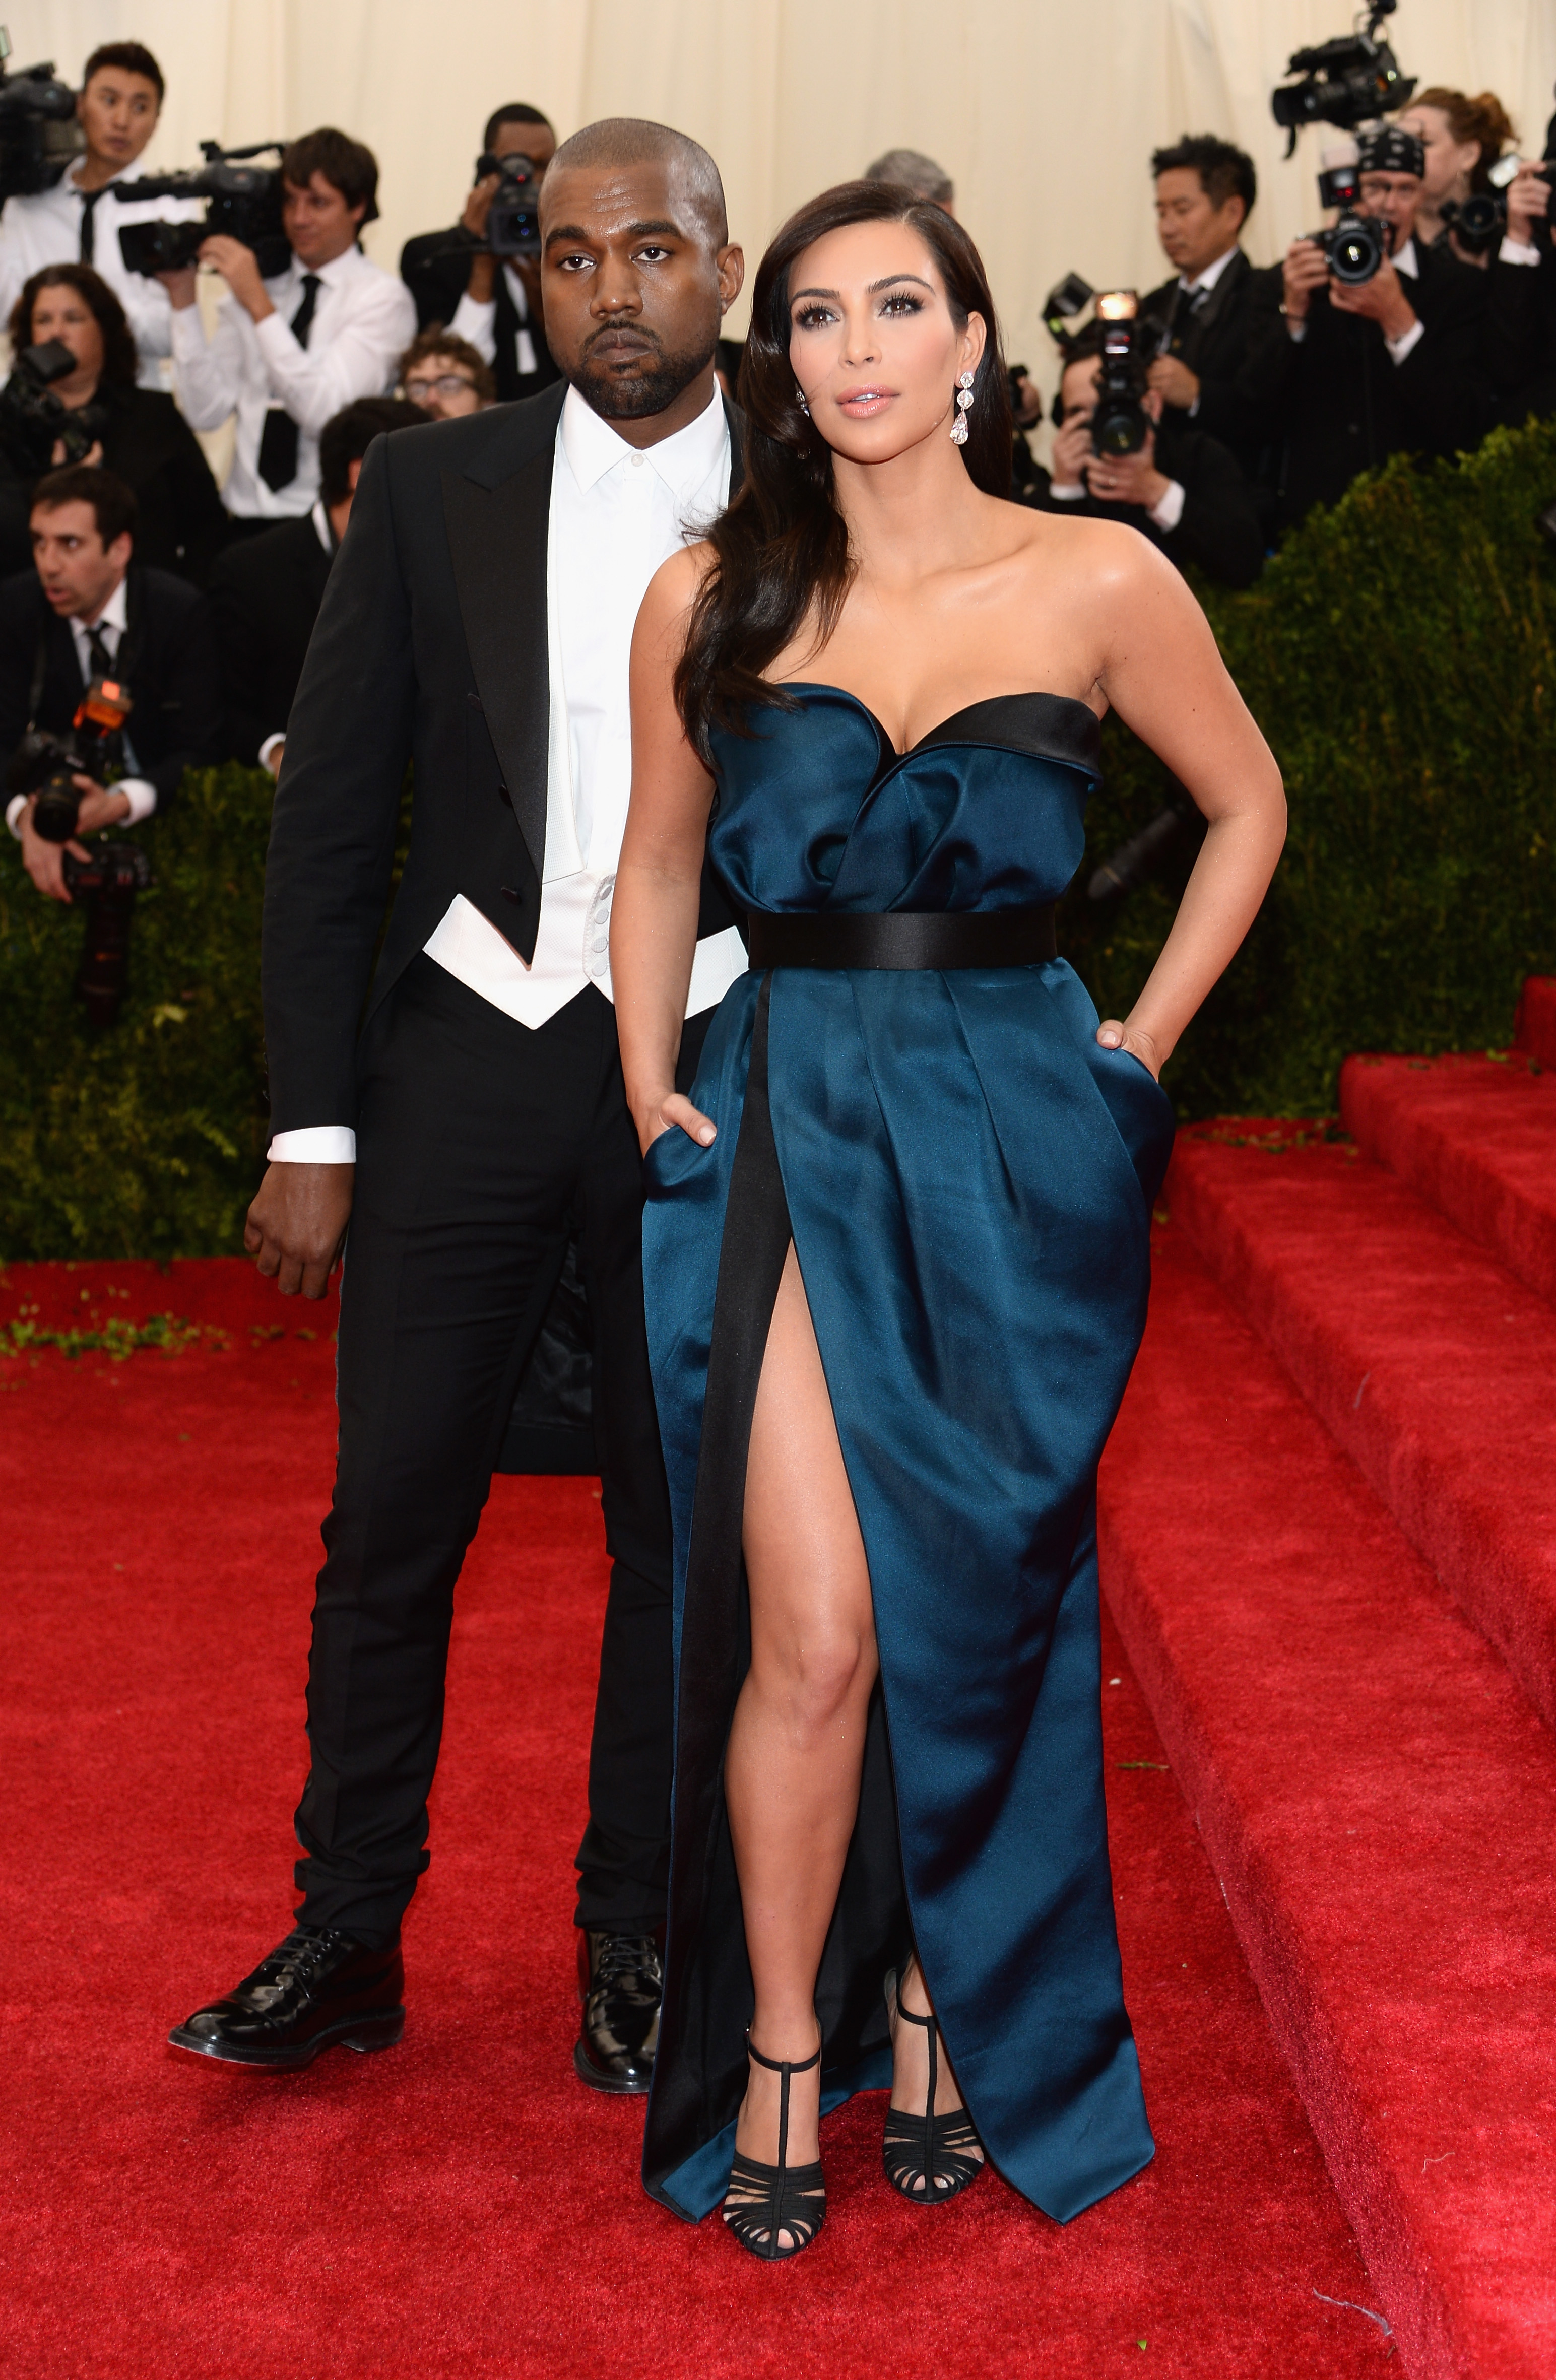 Close-up of Ye and Kim on the red carpet